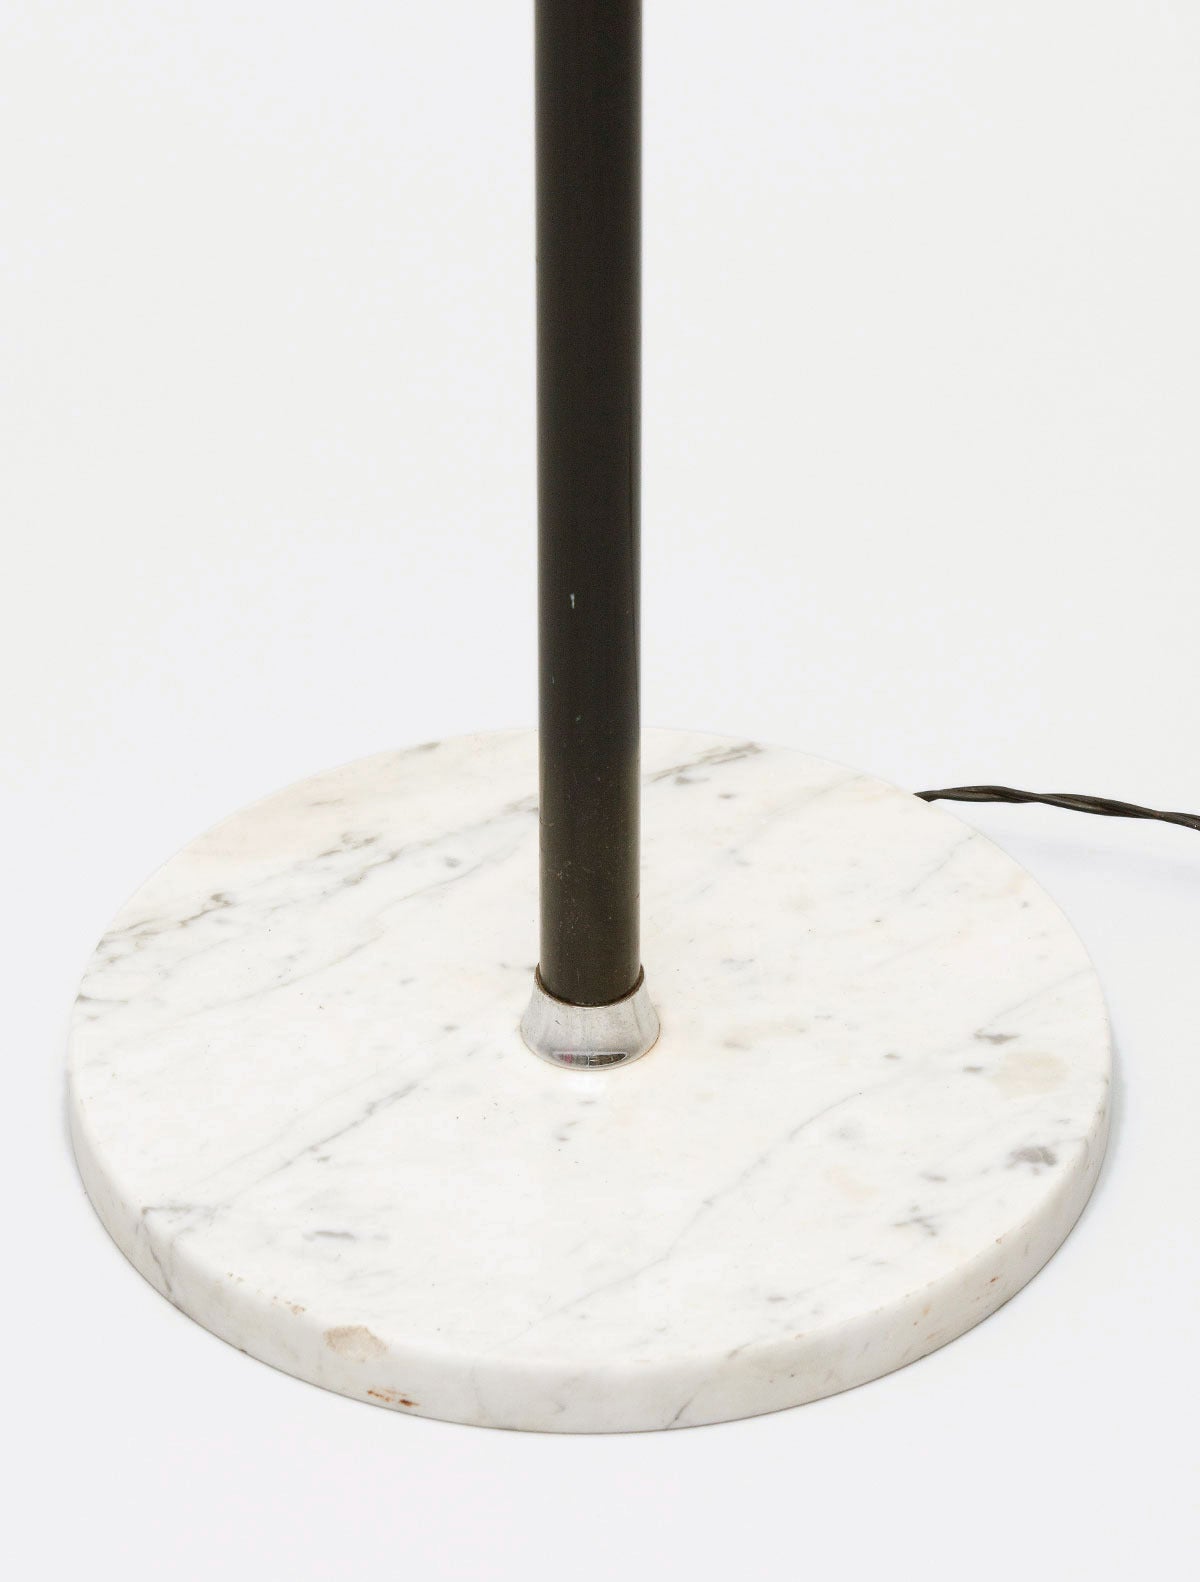 Marble based version of the iconic design from the Milan Triennale of 1951.